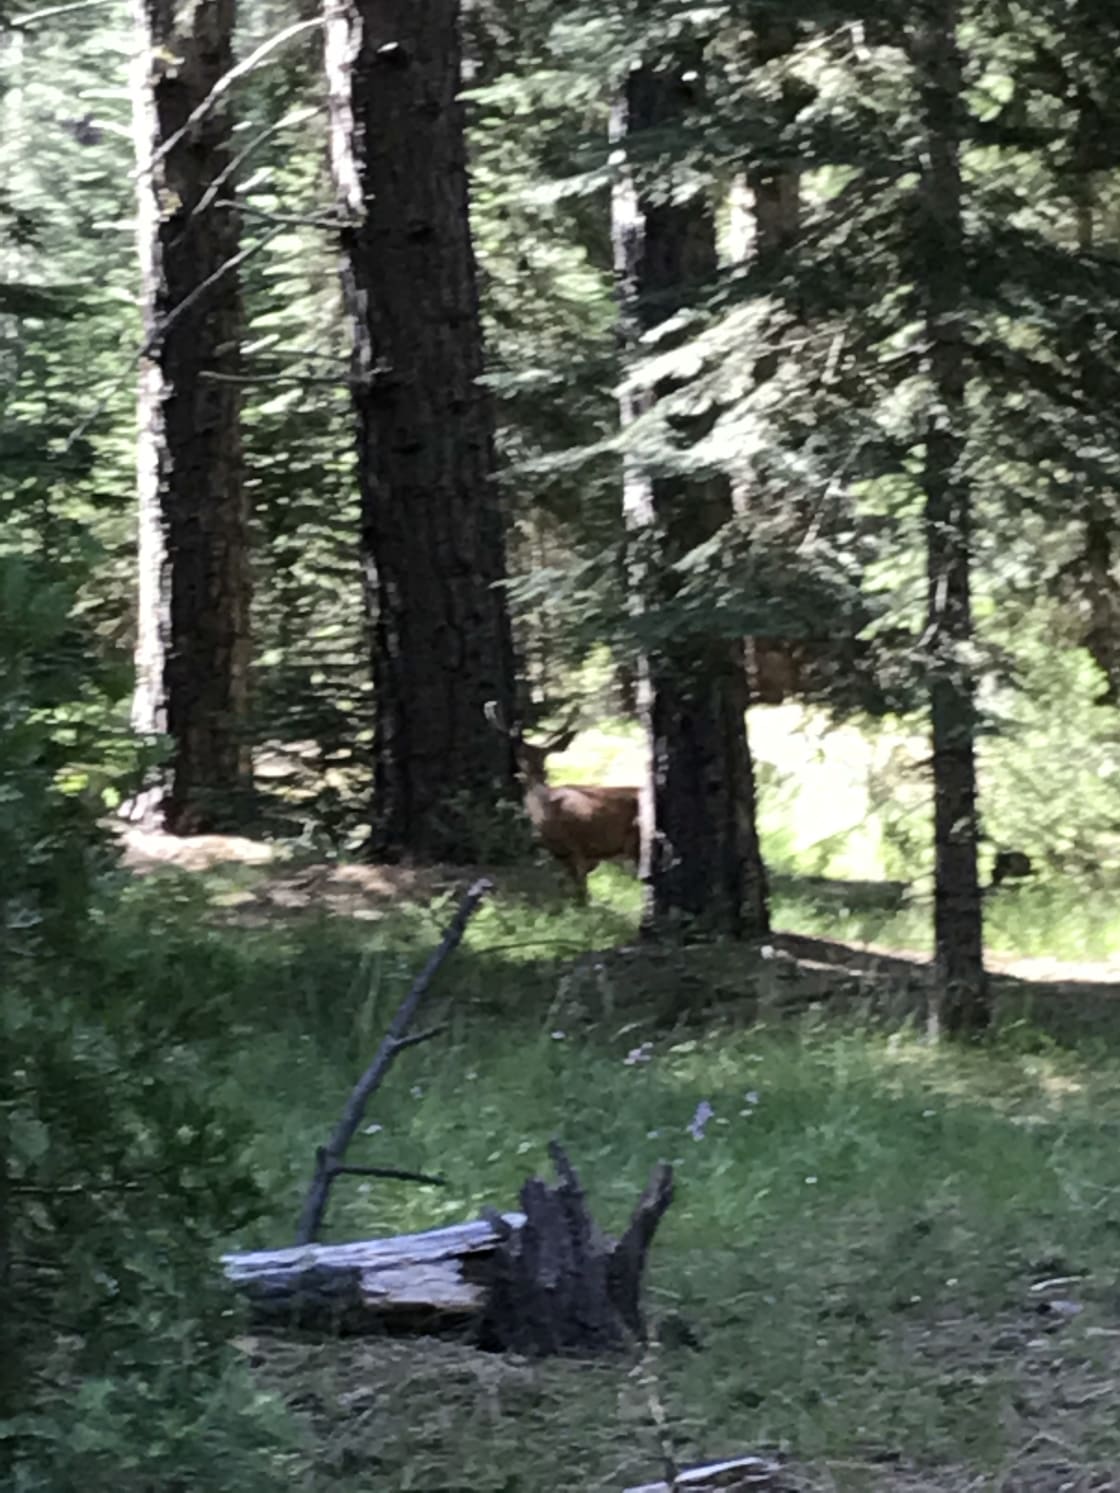 View of a deer from our campsite